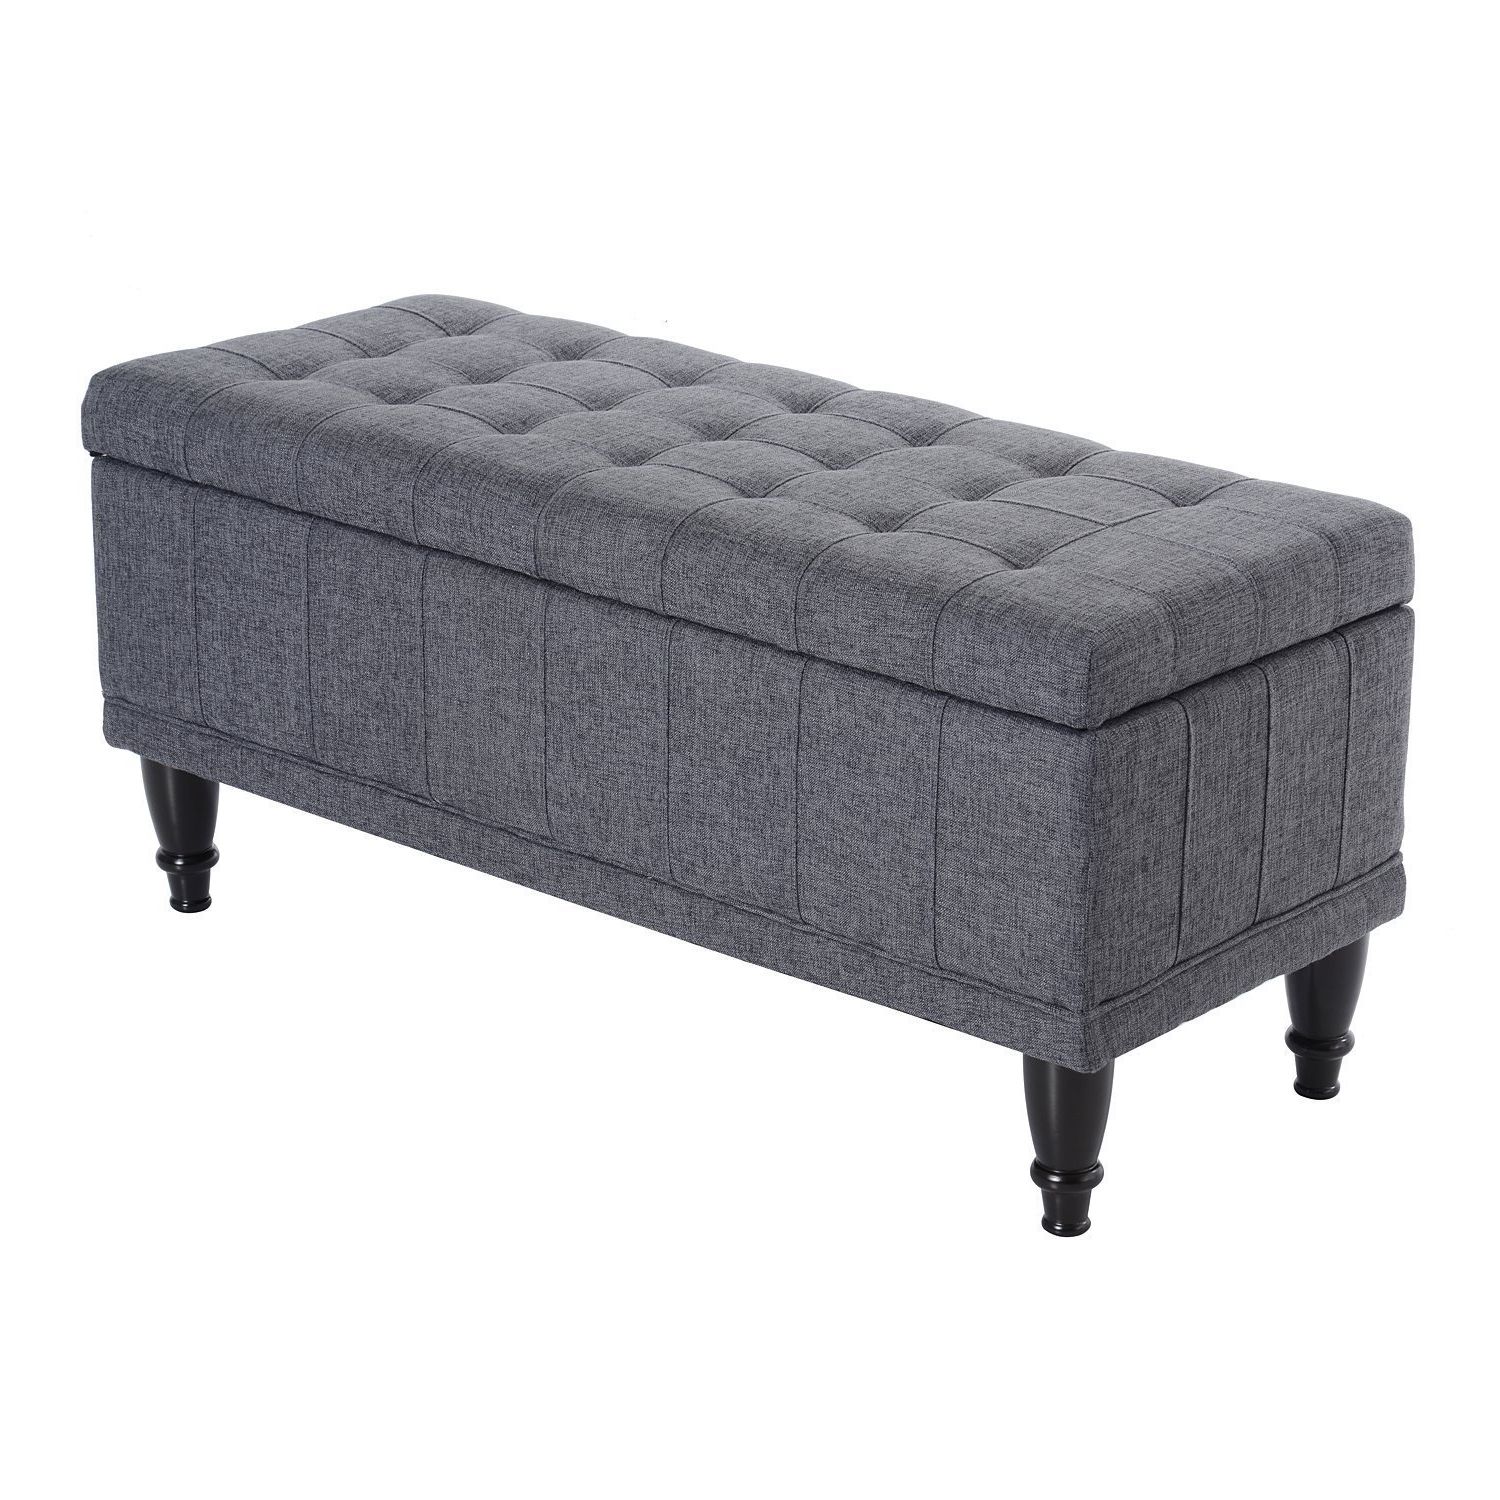 Preferred Gray Fabric Tufted Oval Ottomans For Homcom Large 42" Tufted Linen Fabric Ottoman Storage Bench With Soft (View 2 of 10)